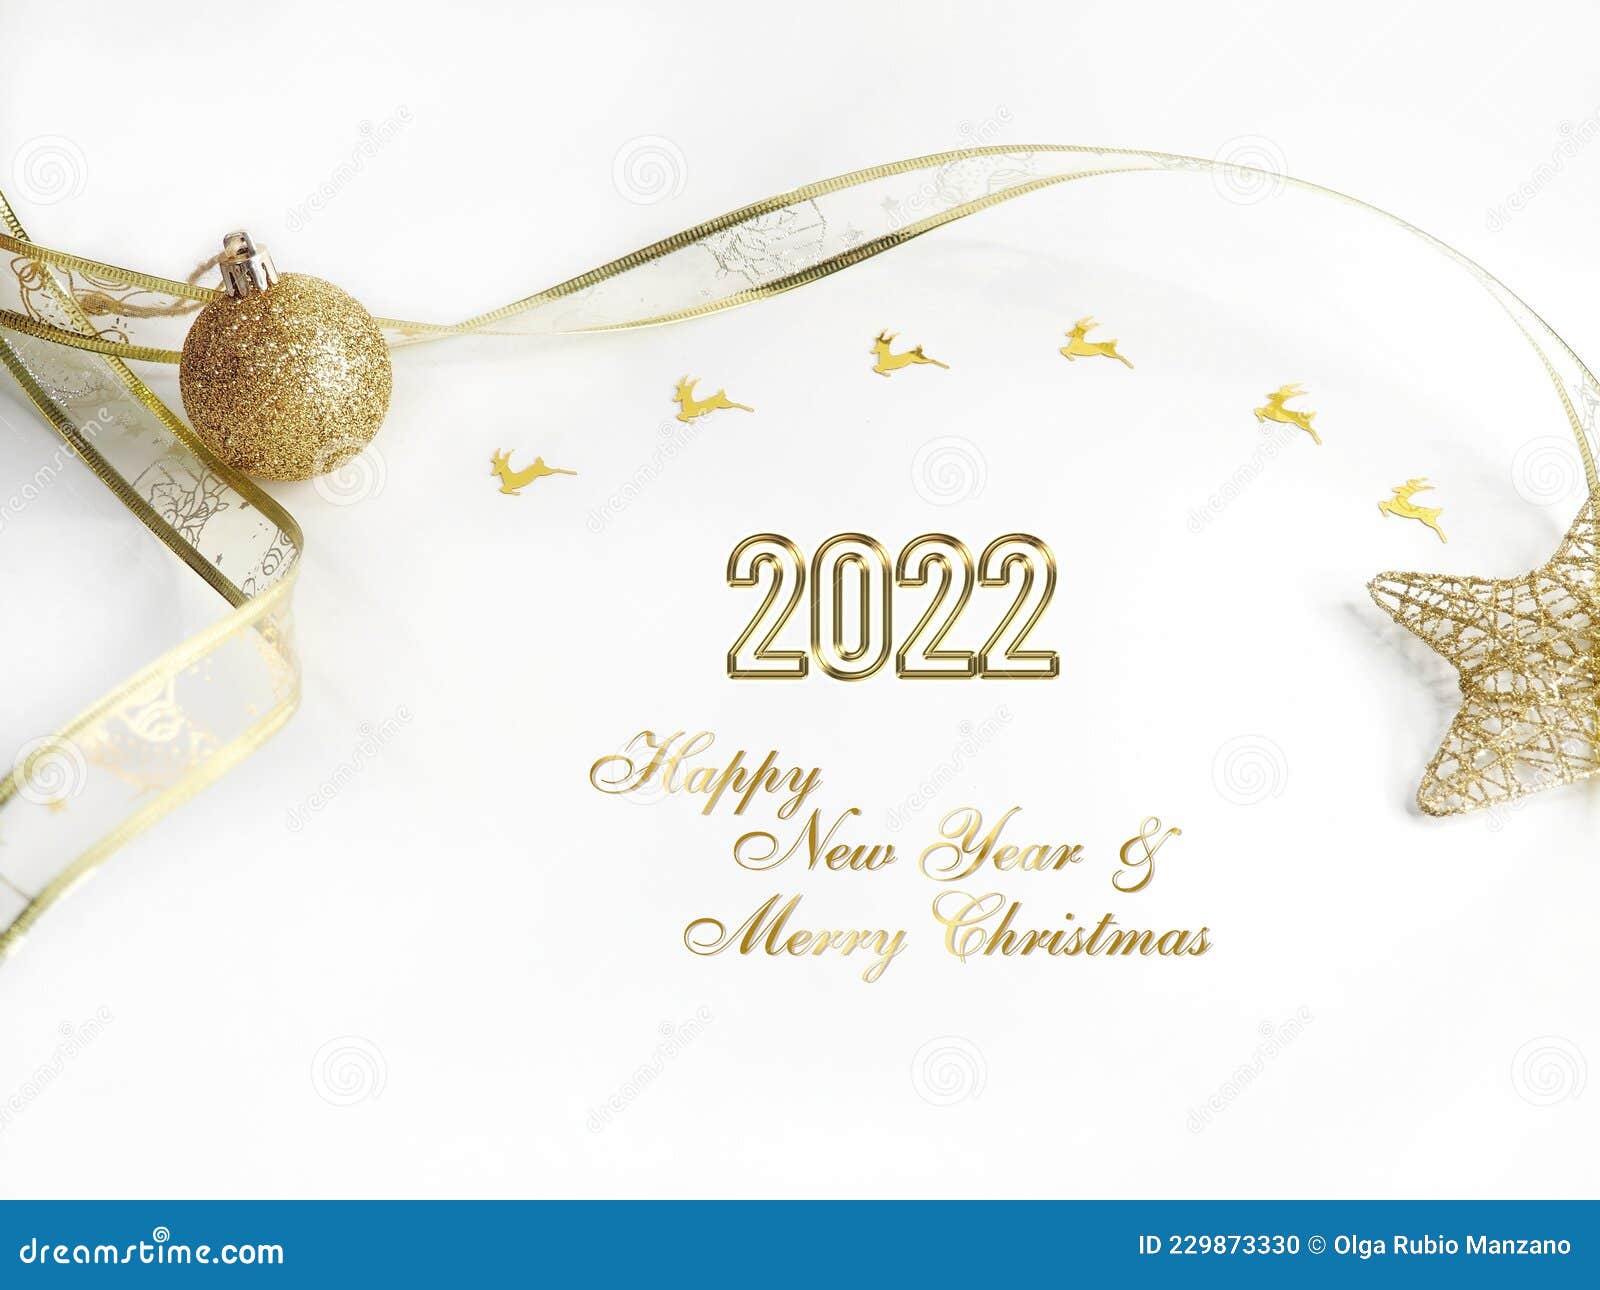 Merry Christmas and Happy New Year 2022 Greeting Card on White Background  Stock Photo - Image of flyer, card: 229873330